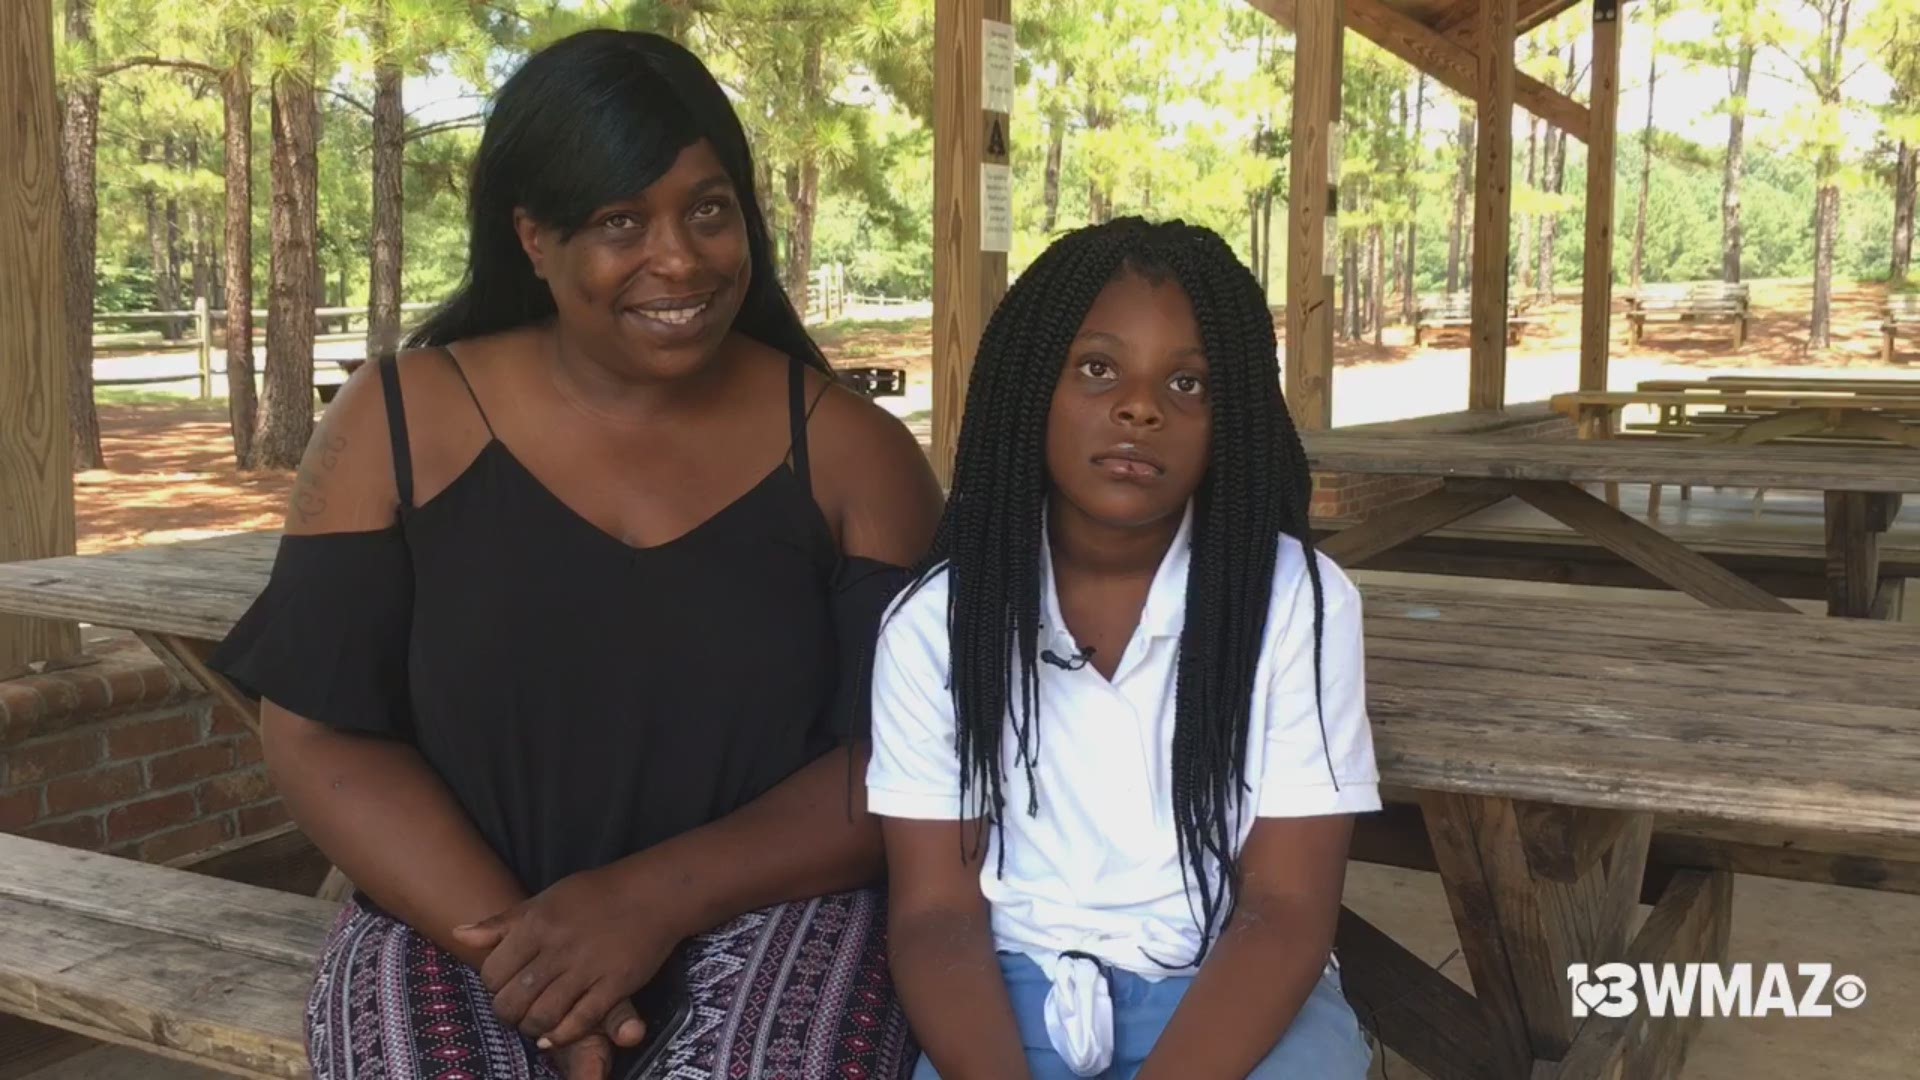 A mother is thanking Bibb County Sheriff’s deputies for performing CPR on her 9-year-old daughter after she almost died trying to save her drowning father at a Macon apartment complex.